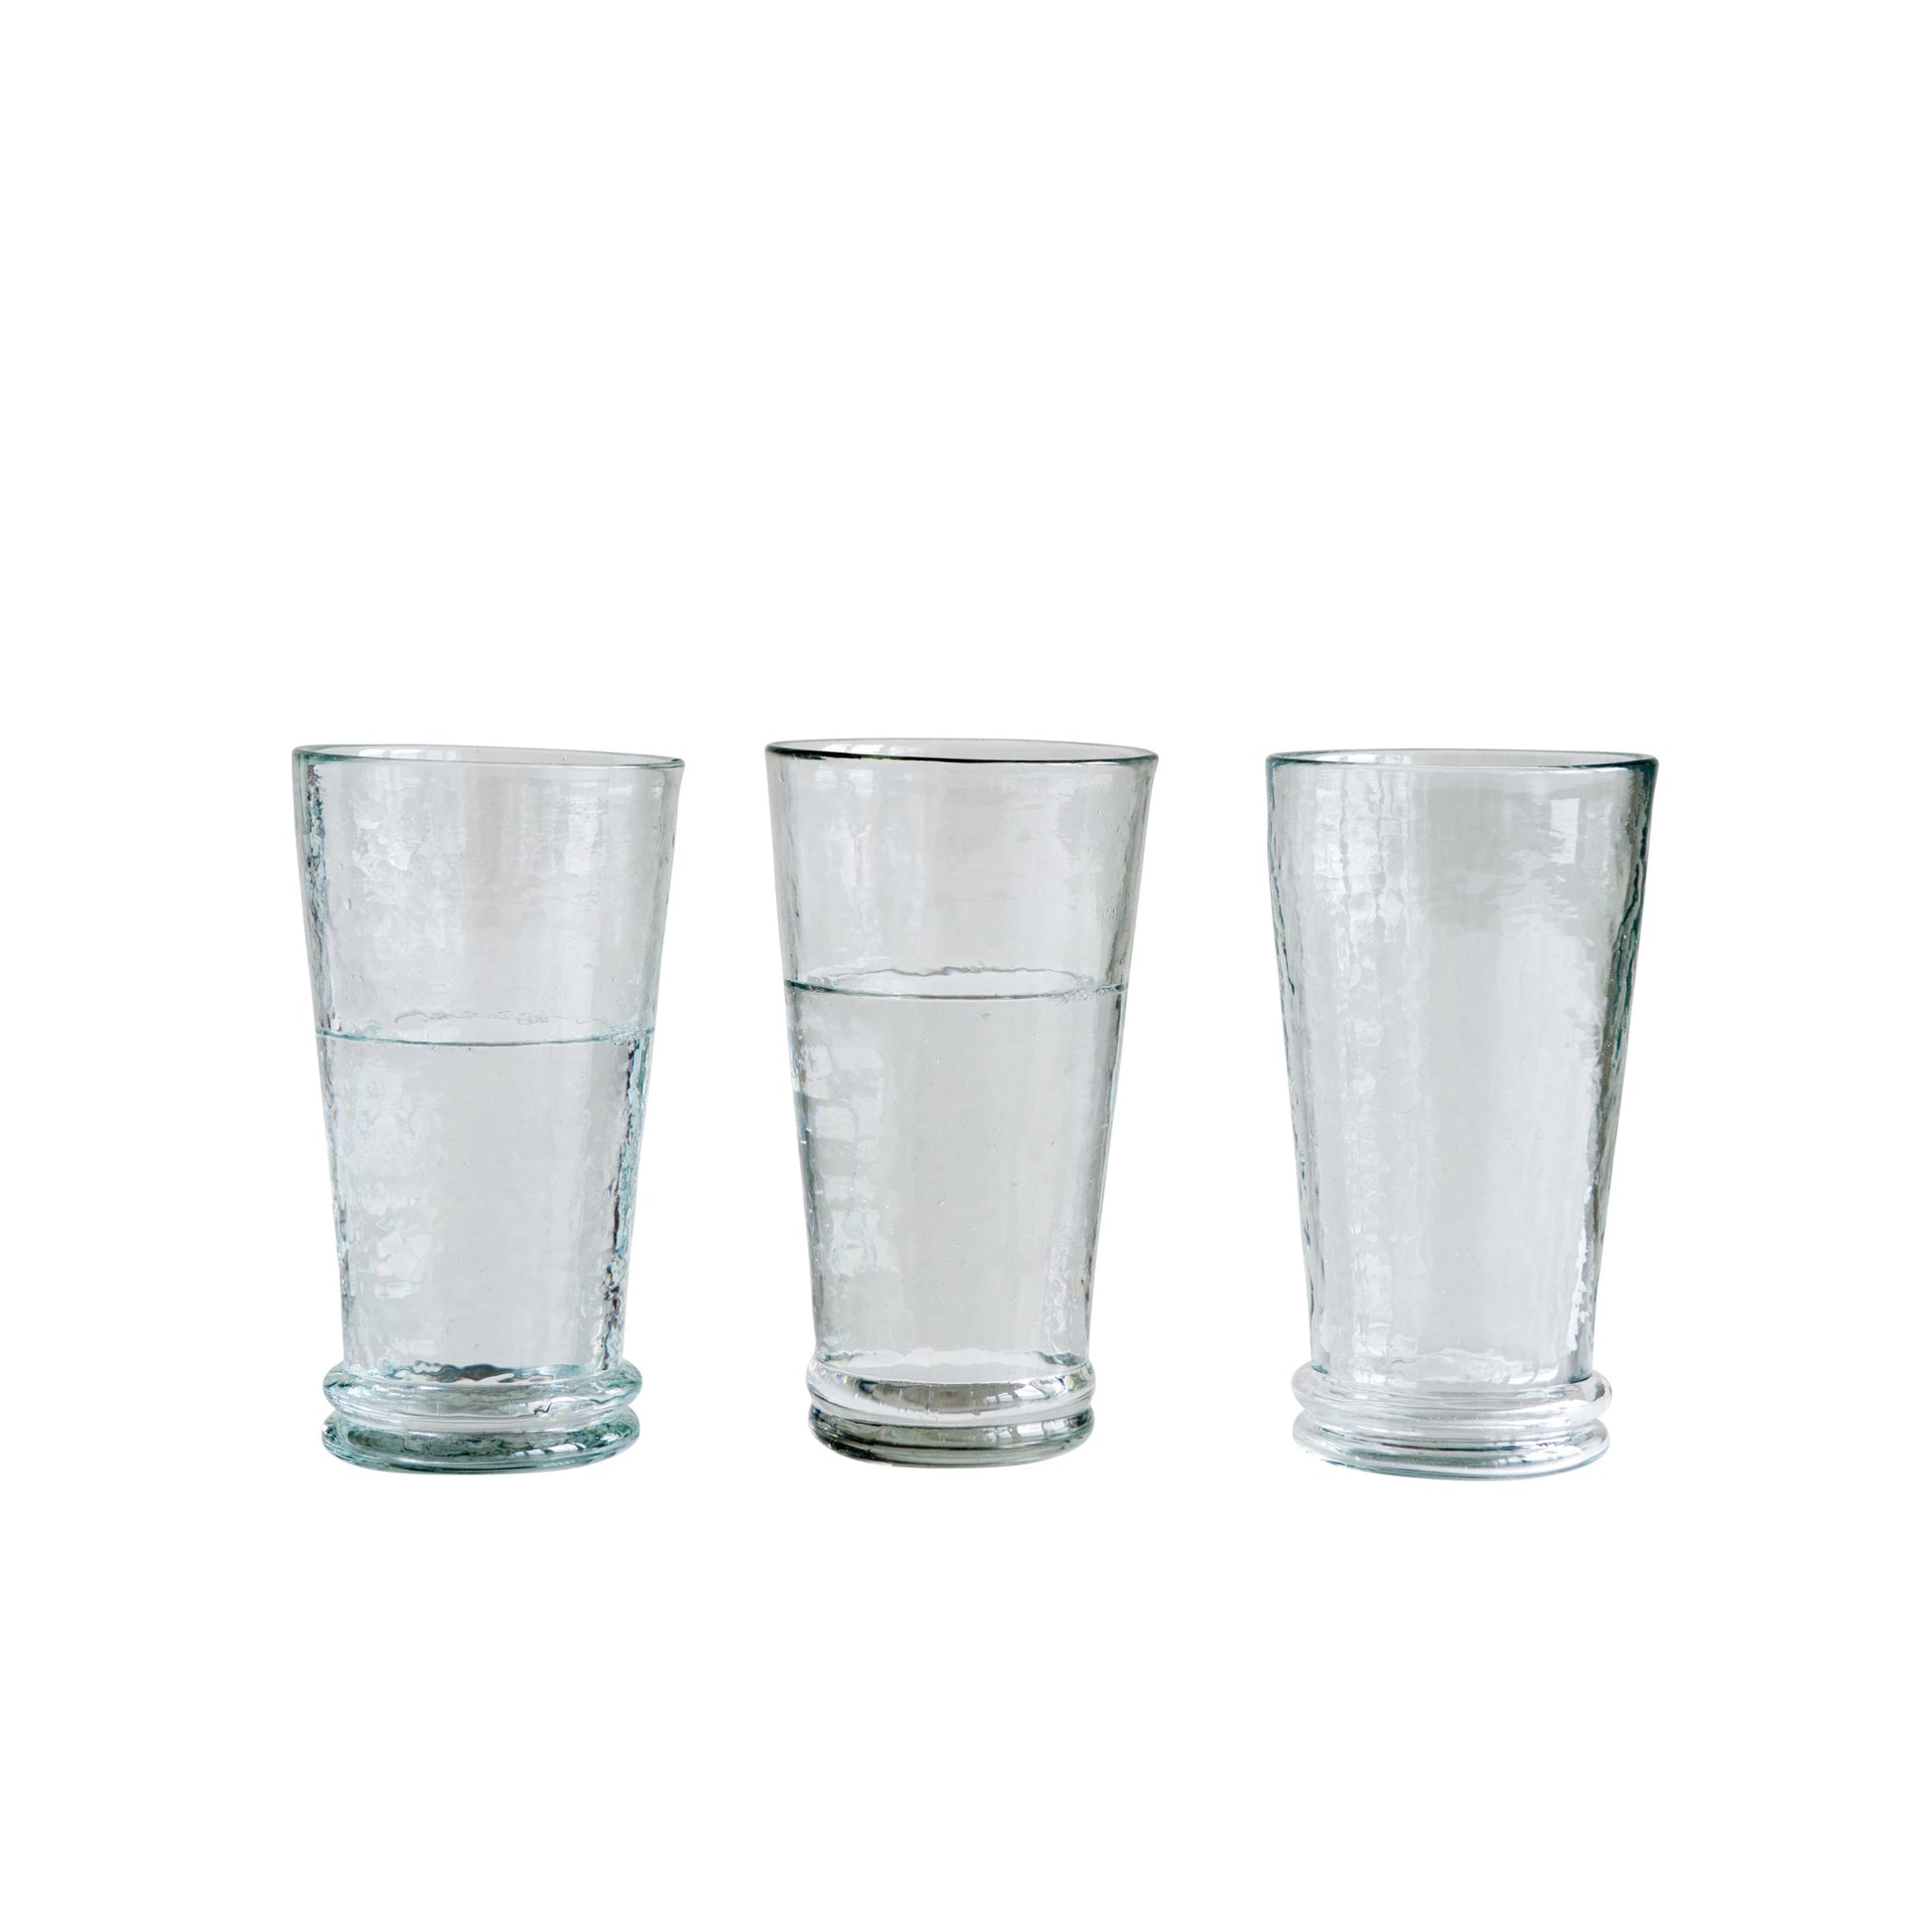 three recycled drinking glasses lined up against a white background